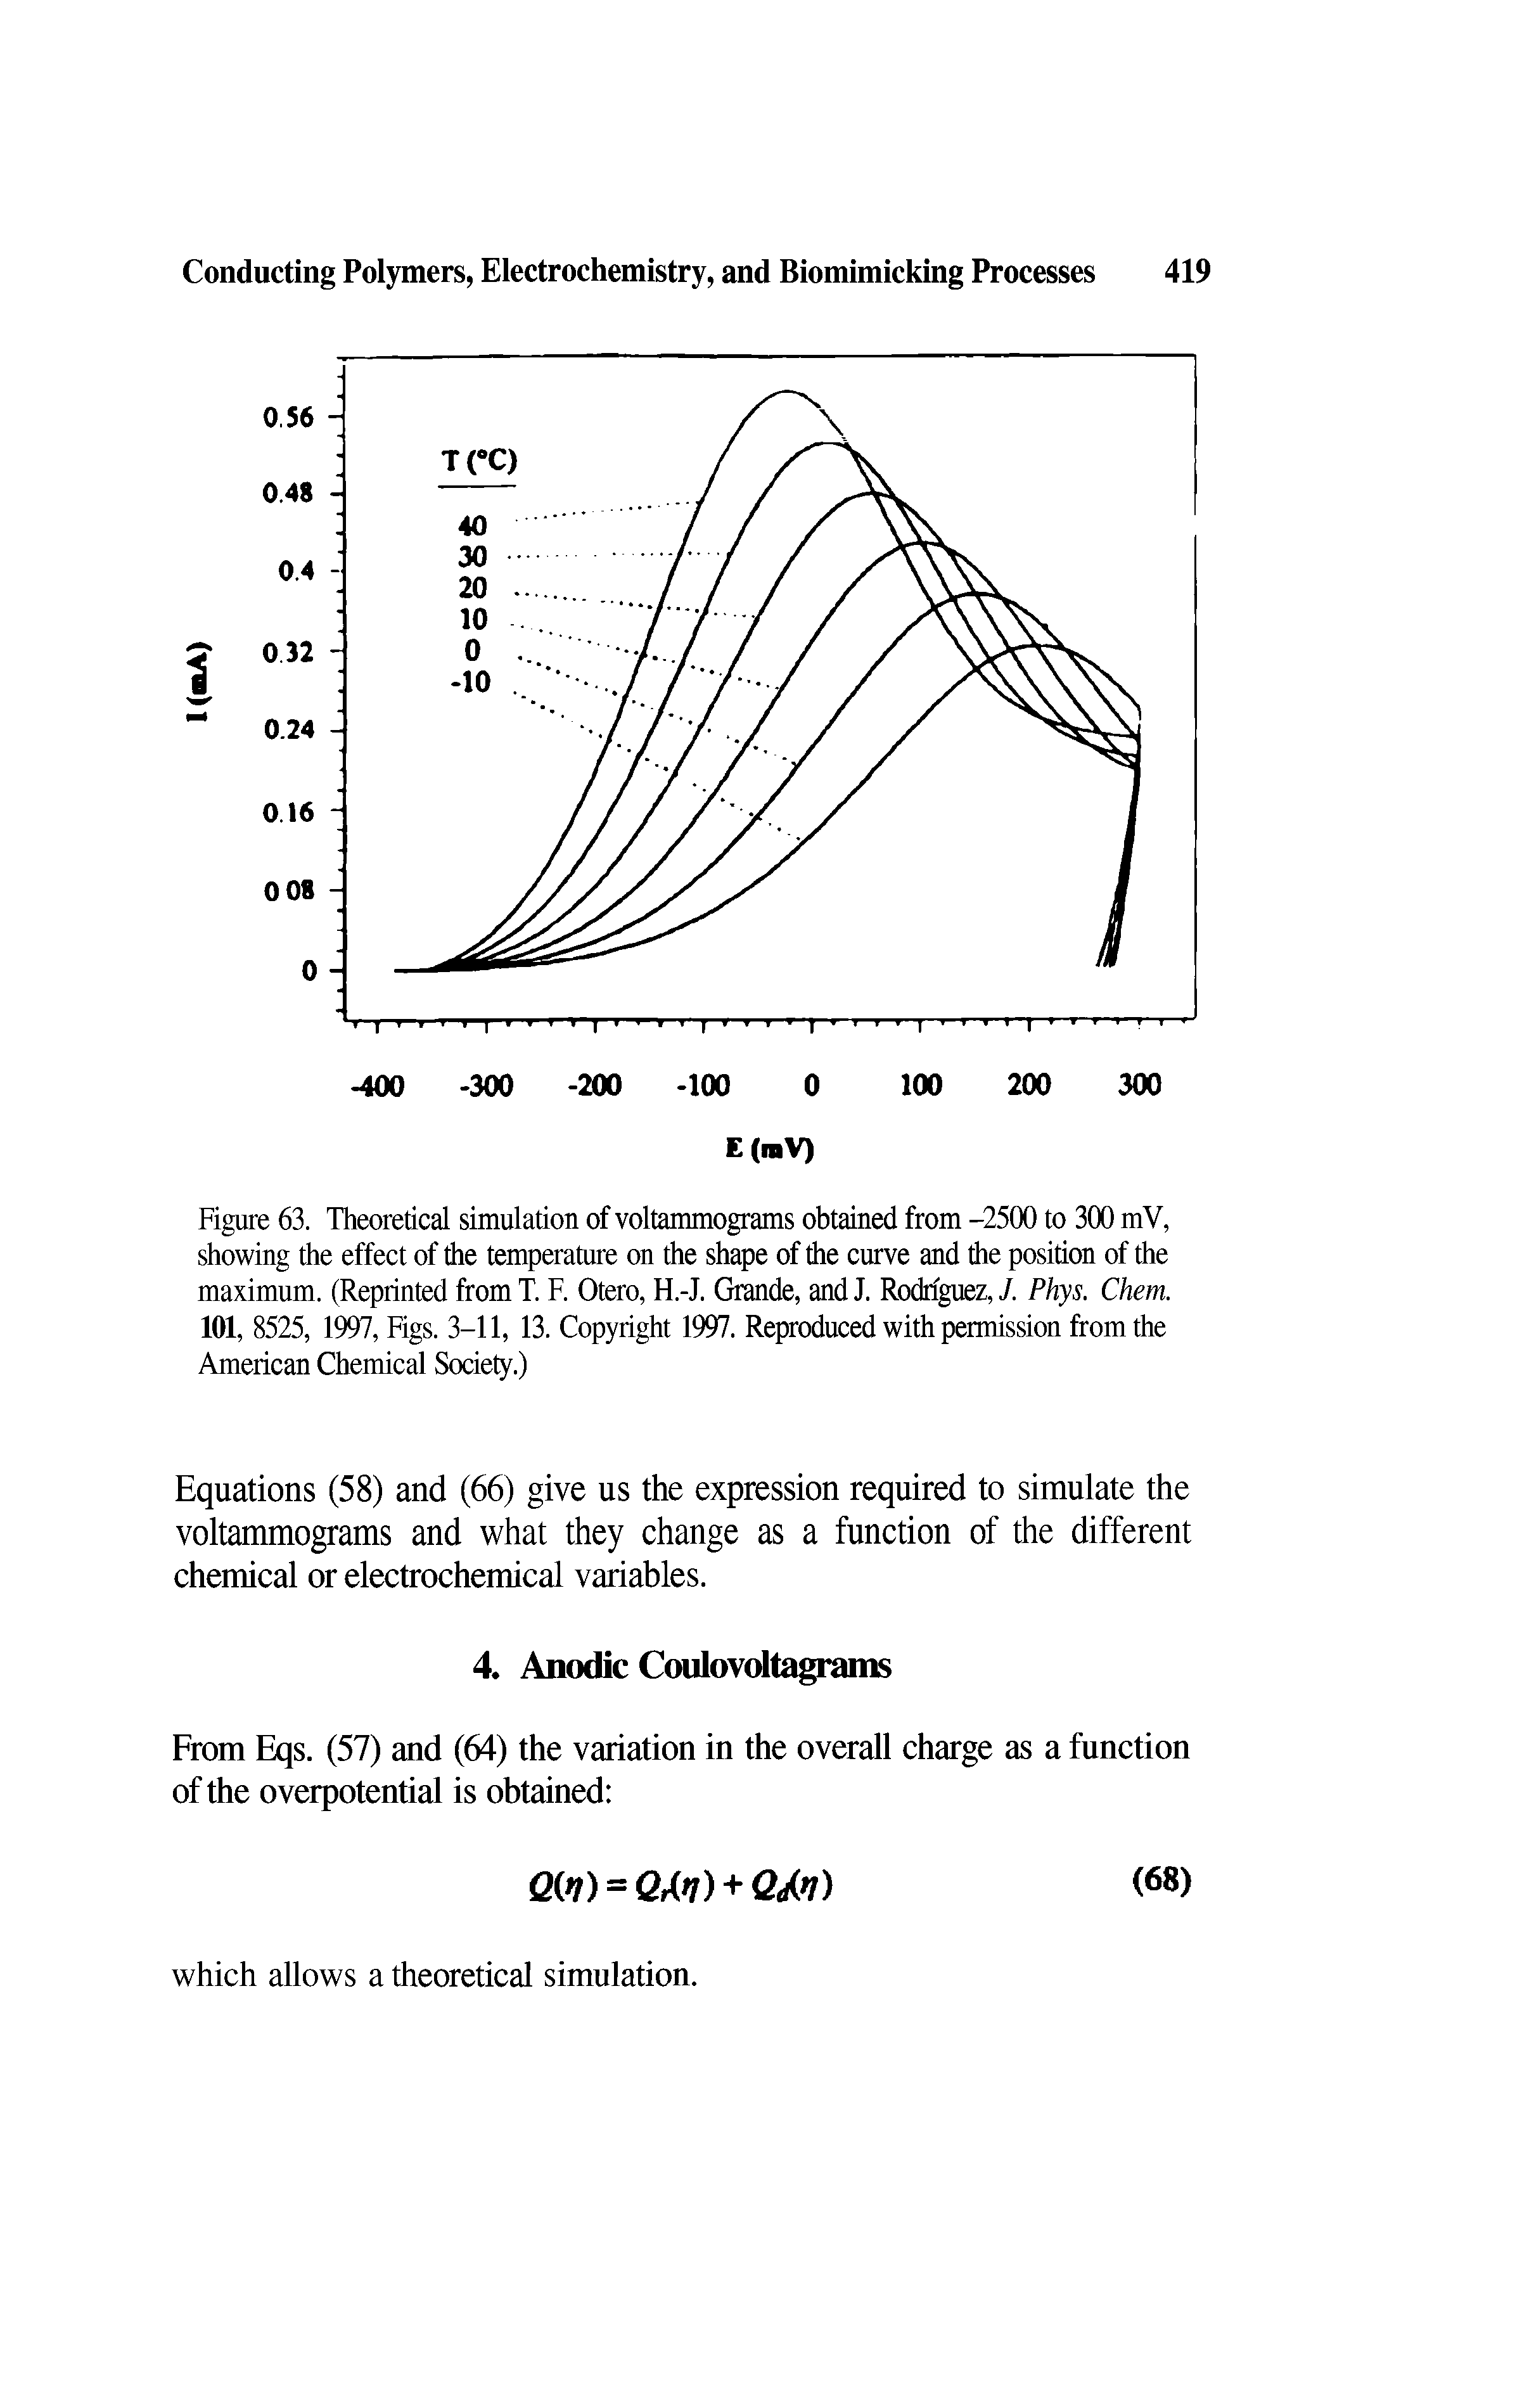 Figure 63. Theoretical simulation of voltammograms obtained from -2500 to 300 mV, showing the effect of the temperature on the shape of the curve and the position of the maximum. (Reprinted from T. F. Otero, H.-J. Grande, and J. Rodriguez, J. Phys. Chem. 101, 8525, 1997, Figs. 3-11, 13. Copyright 1997. Reproduced with permission from the American Chemical Society.)...